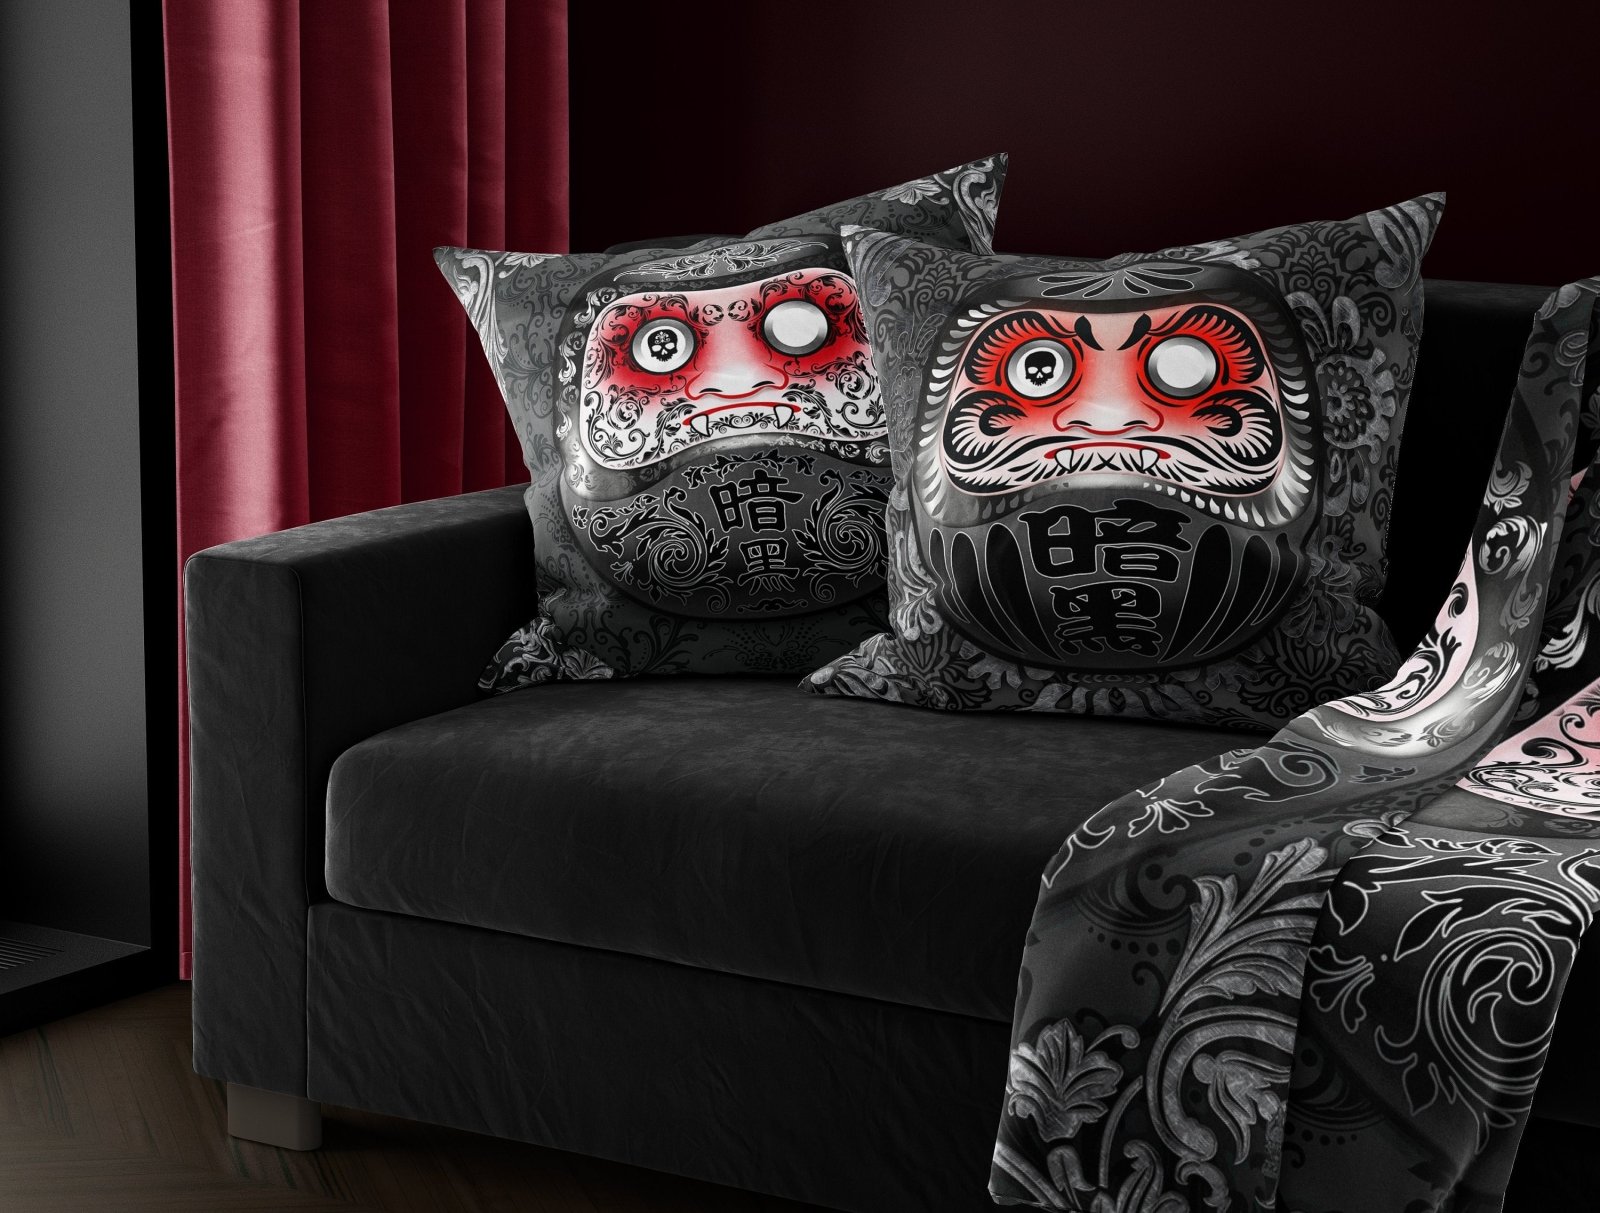 Daruma Throw Pillow, Decorative Accent Cushion, Funny Eclectic Japanese Room Decor, Alternative Home - Gothic, Vampire - Abysm Internal